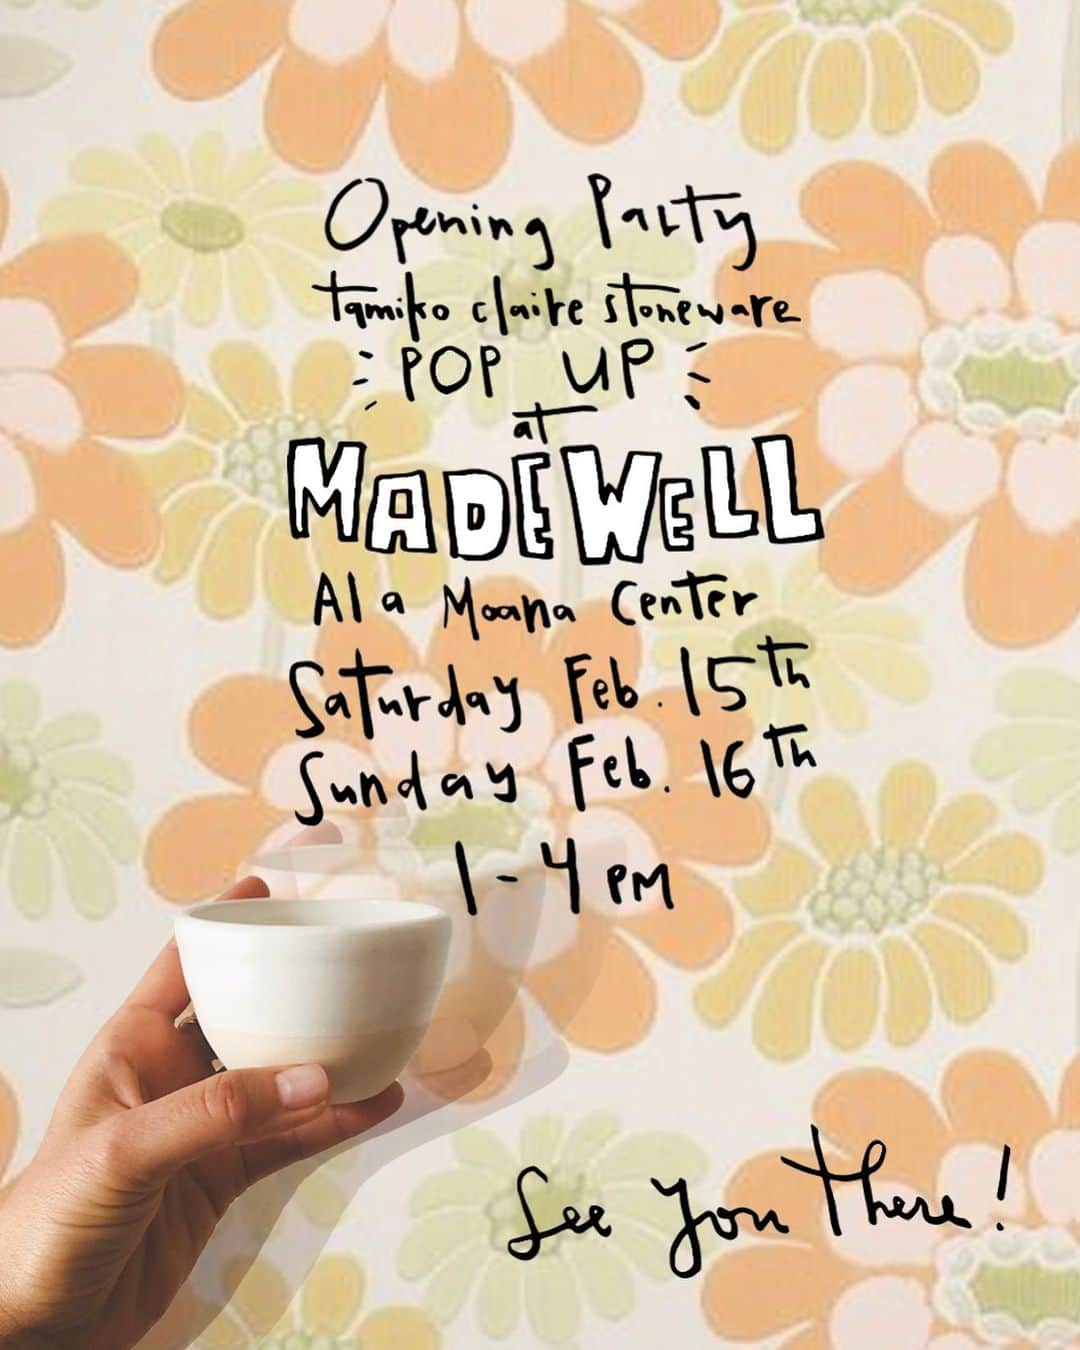 Tamikoのインスタグラム：「hi friends! 〰️ if you are in Hawai’i this weekend, please come by my little pop up @tamikoclairestoneware at the opening party for @madewell (in Ala Moana by Longs). it’s their first Hawai’i location guaranteed to be a fun time! very humbled to be there among the talented @susanna_cromwell_art and @paikohawaii as well. Hope you can make it! 今週末好きなブランドのMadewellのオープニングパーティーでポップアップやってます！ハワイにいたら来て下さいね 🌼🧡#everydaymadewell #tamikoclaire」